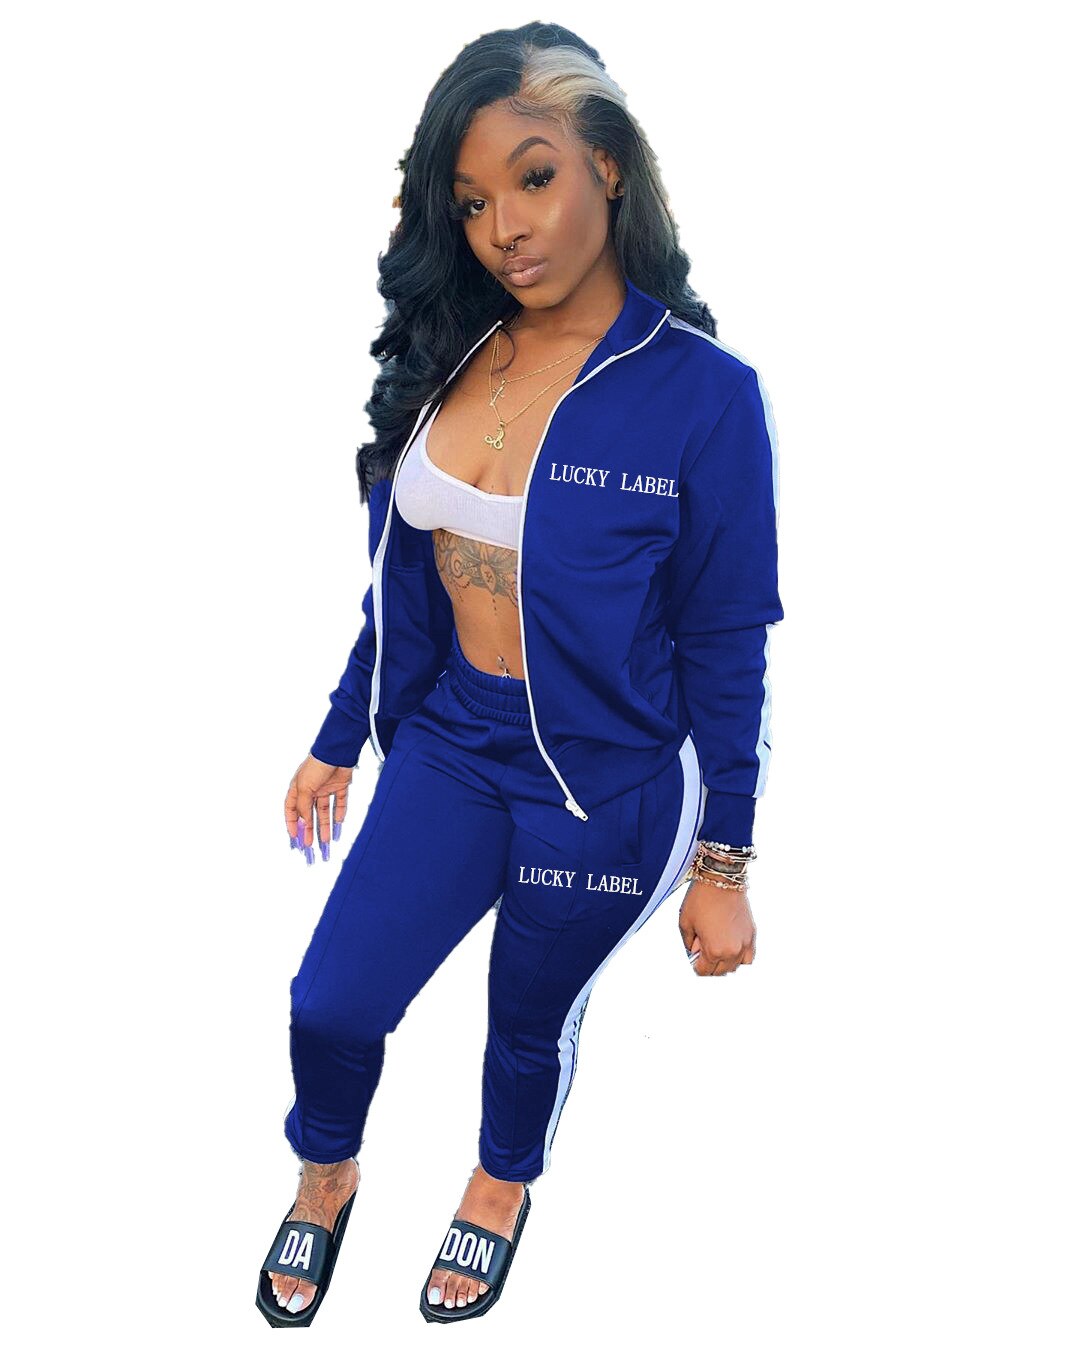 Ronikasha Women Two Piece Pants Set Sportswear Letter Lucky Label Embroidery Patchwork Zipper Tops + Sport Leggings Tracksuits